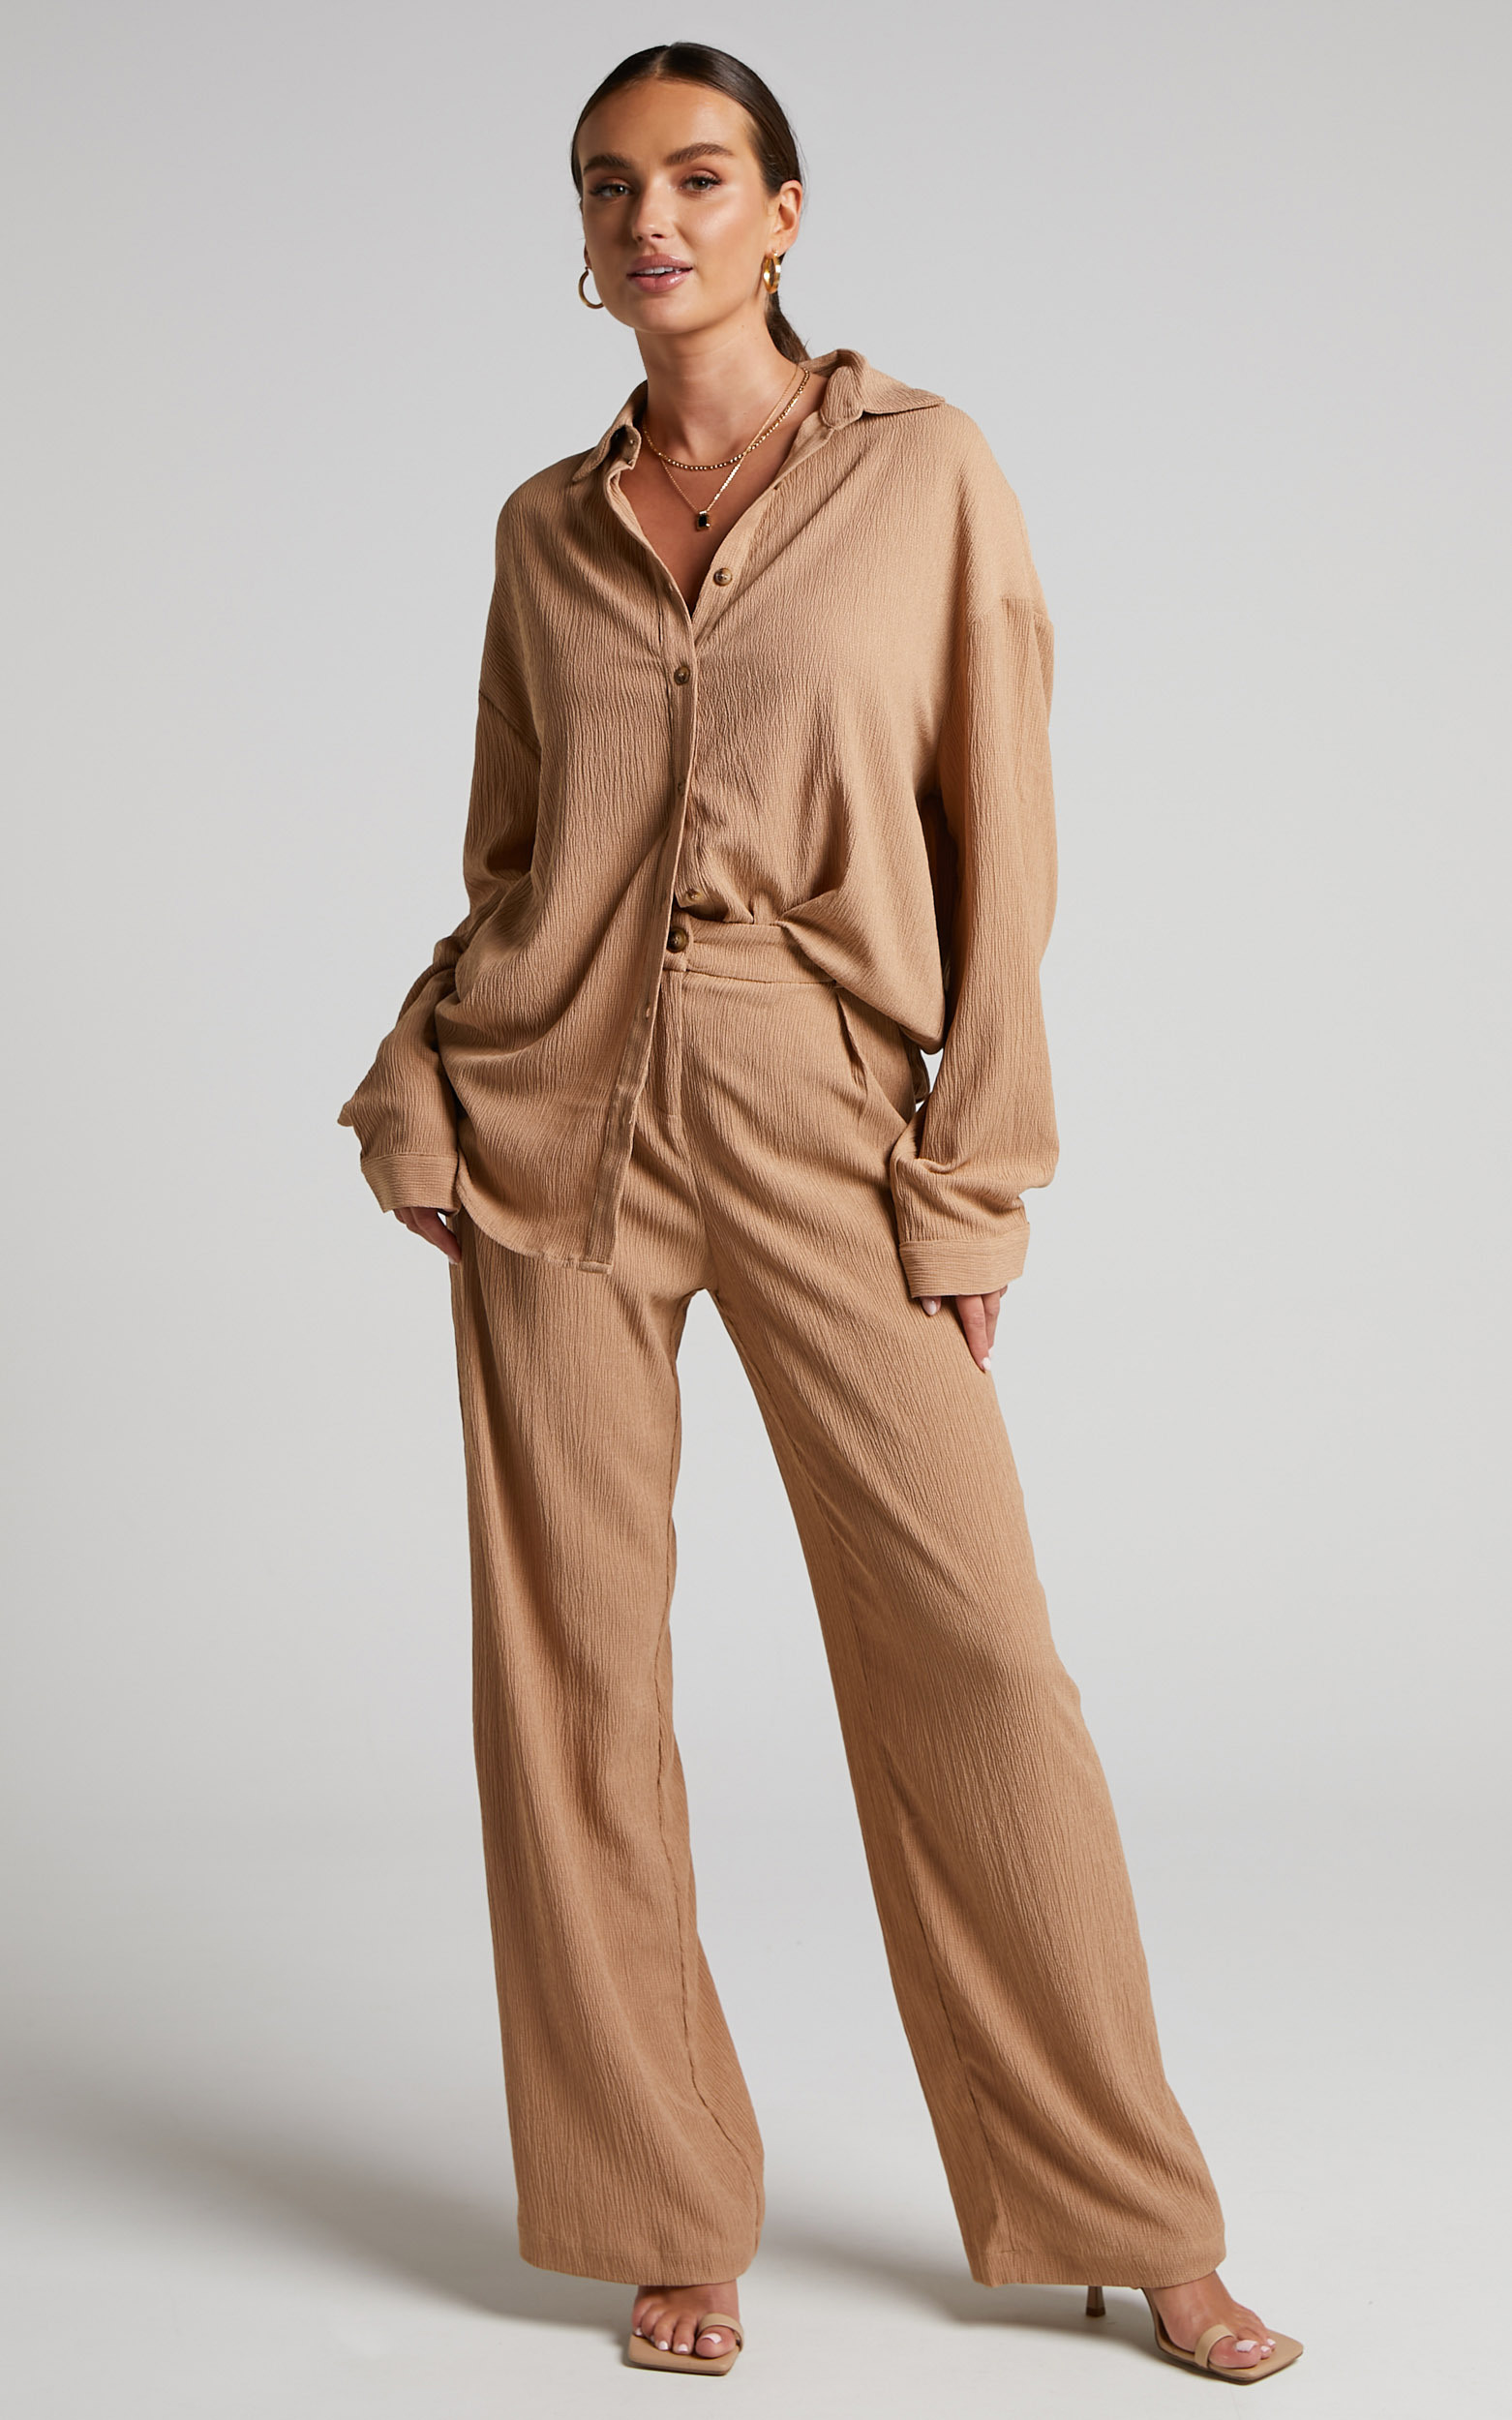 Isabeau Trousers - Mid Rise Relaxed Box Pleat Tailored Trousers in Mocha - 04, BRN2, hi-res image number null